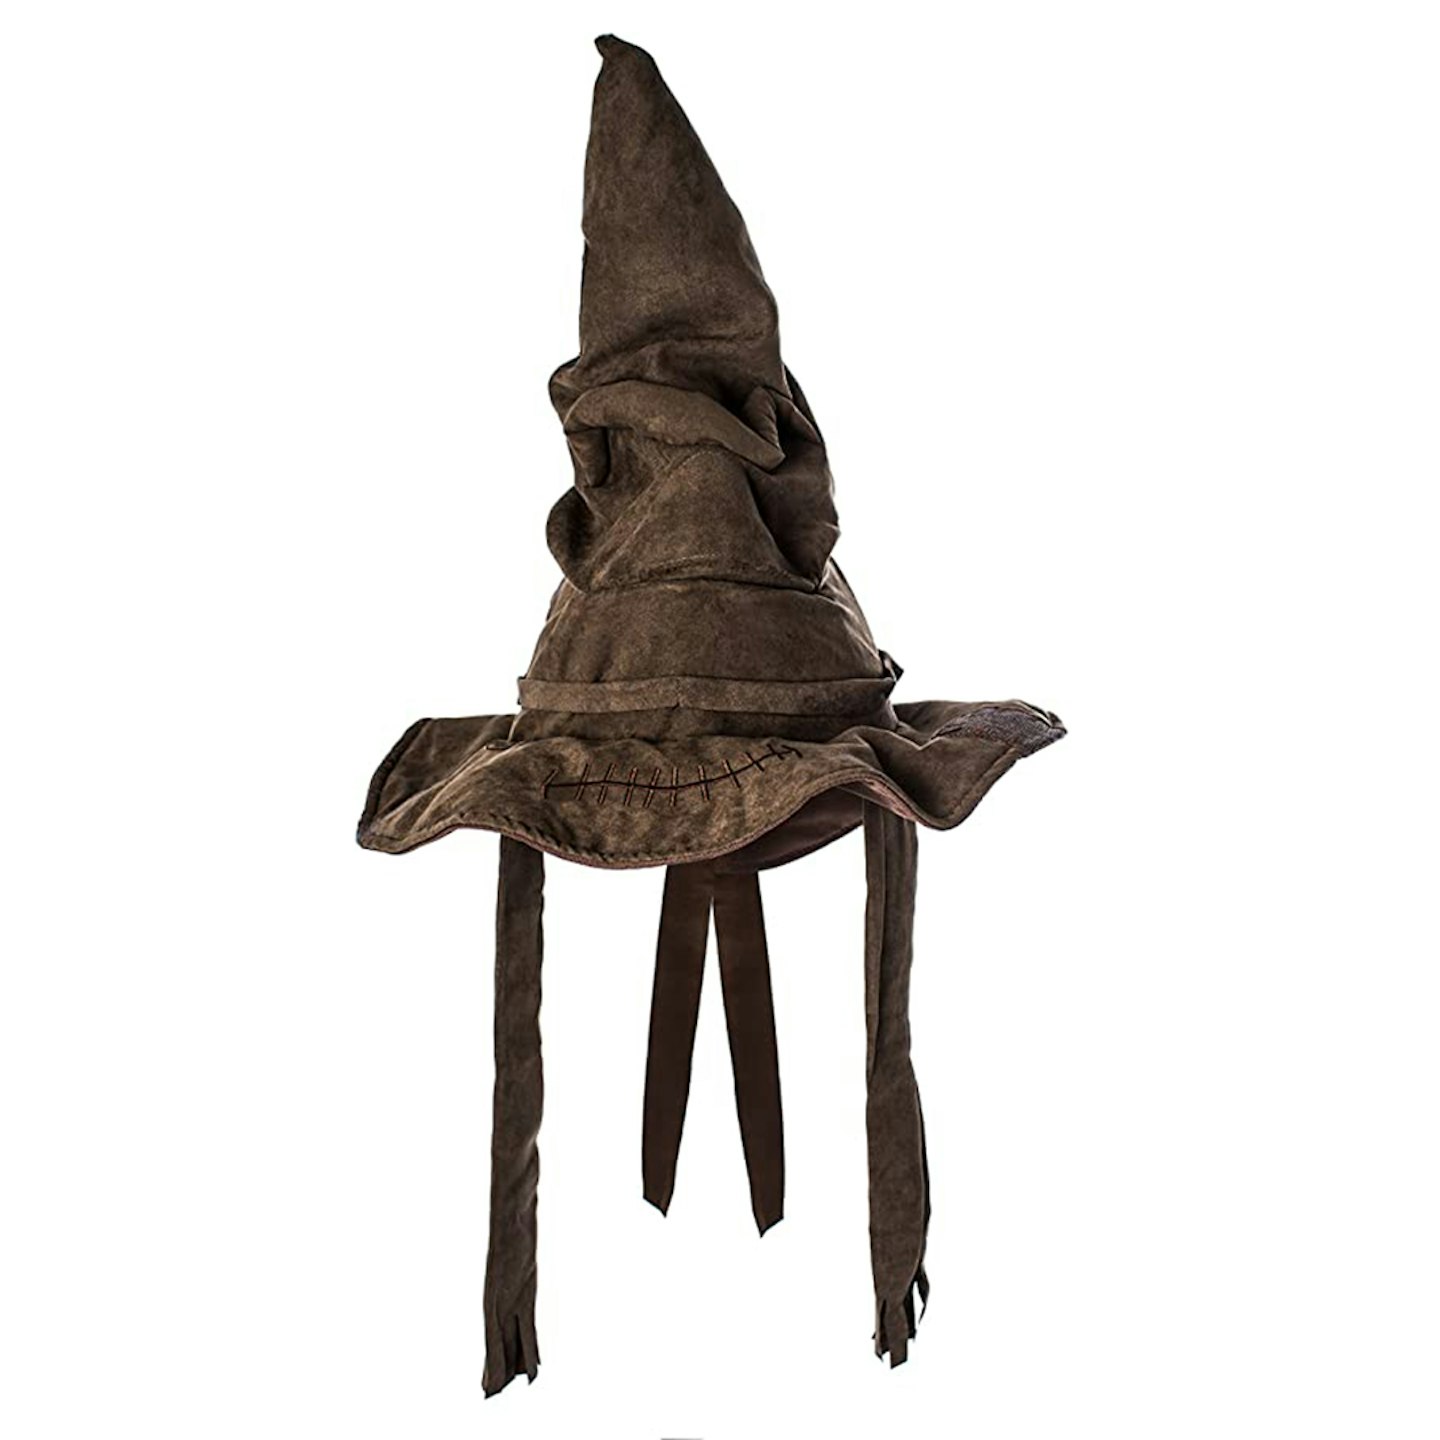 Yume Toys 13083 Harry Potter Real Talking Sorting Hat